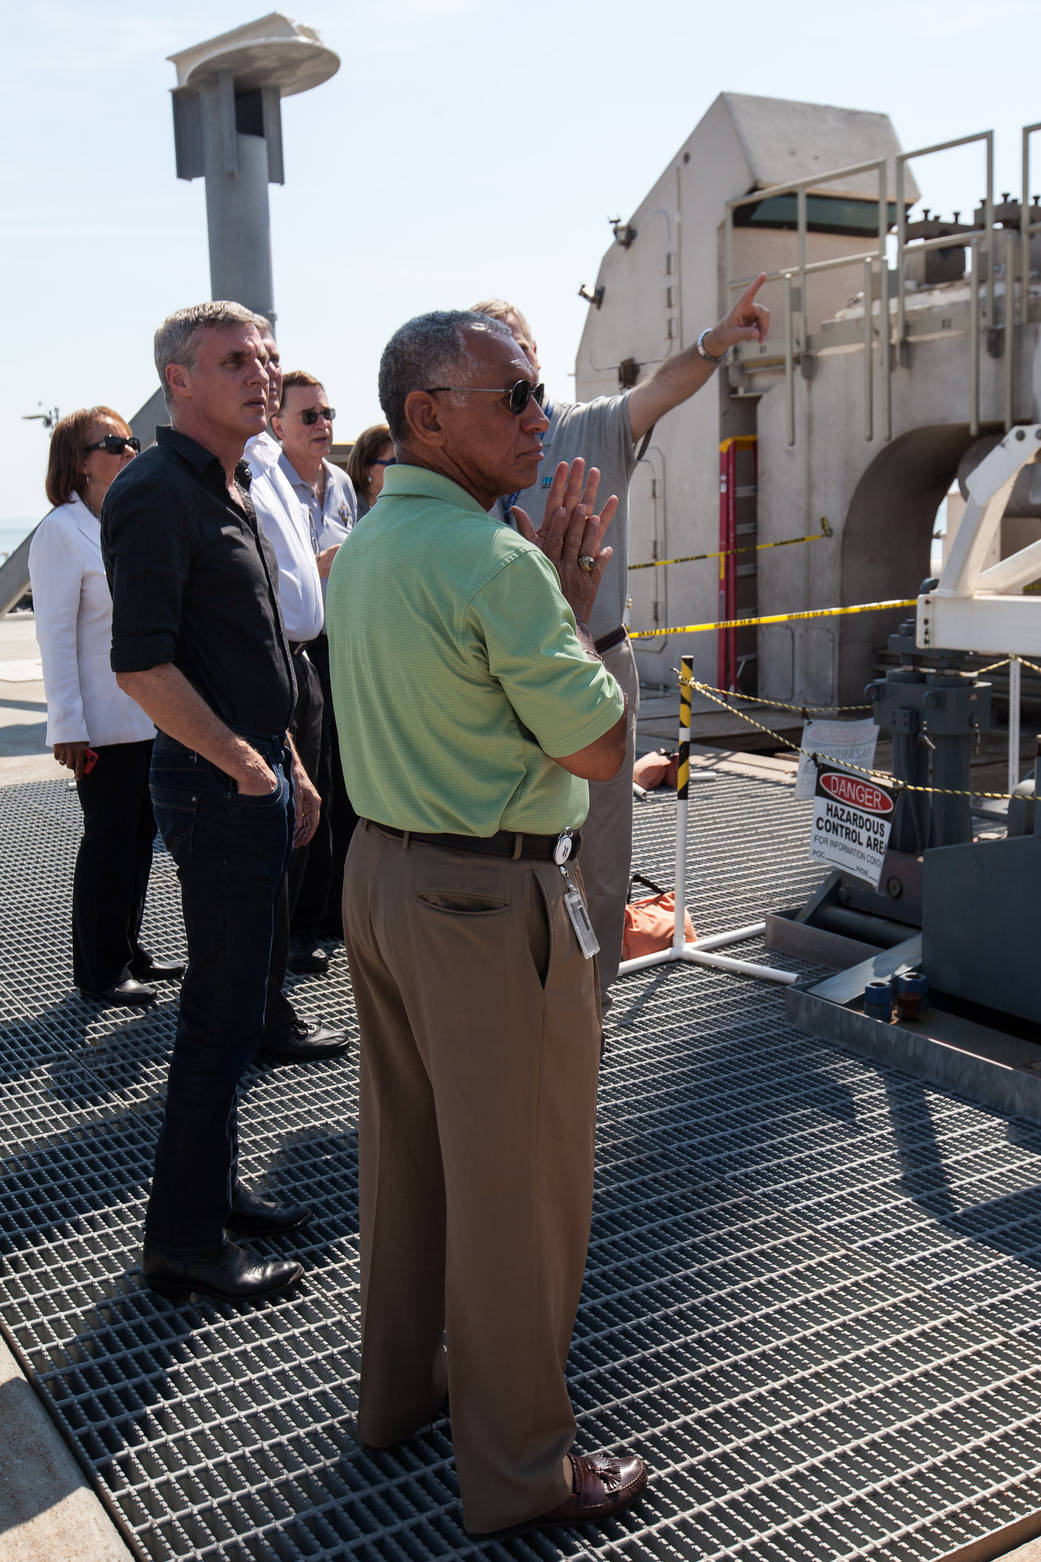 Administrator Charles Bolden toured the Horizontal Integration Facility at NASA's Wallops Flight Facility in Virginia on August 